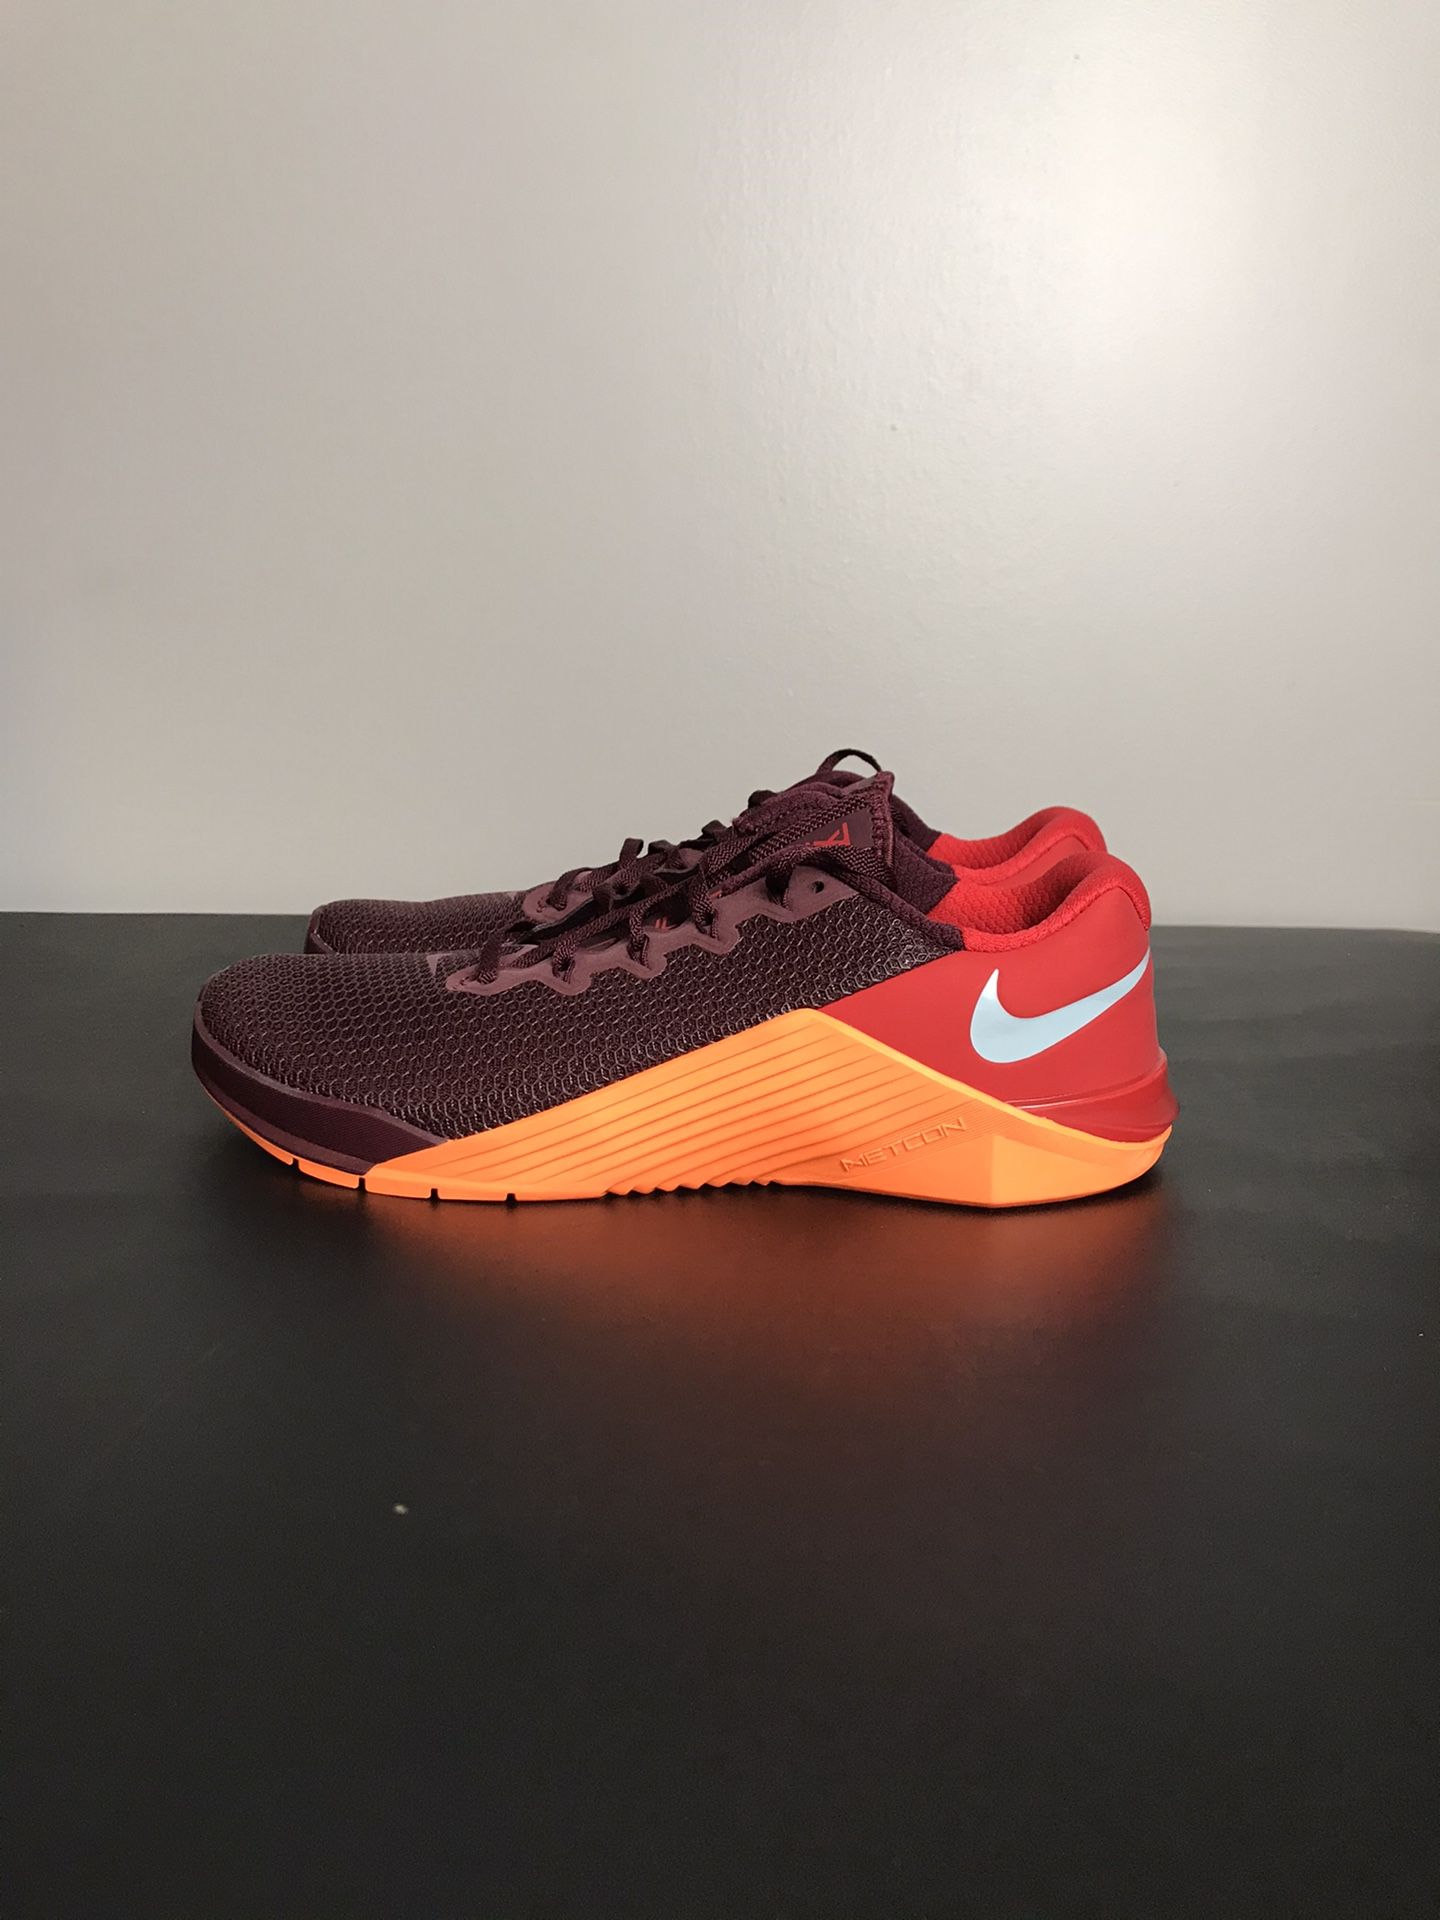 NEW Nike Metcon 5 Night Maroon Red Orange Gym Training Men's Size 9 AQ1189-656 New without box